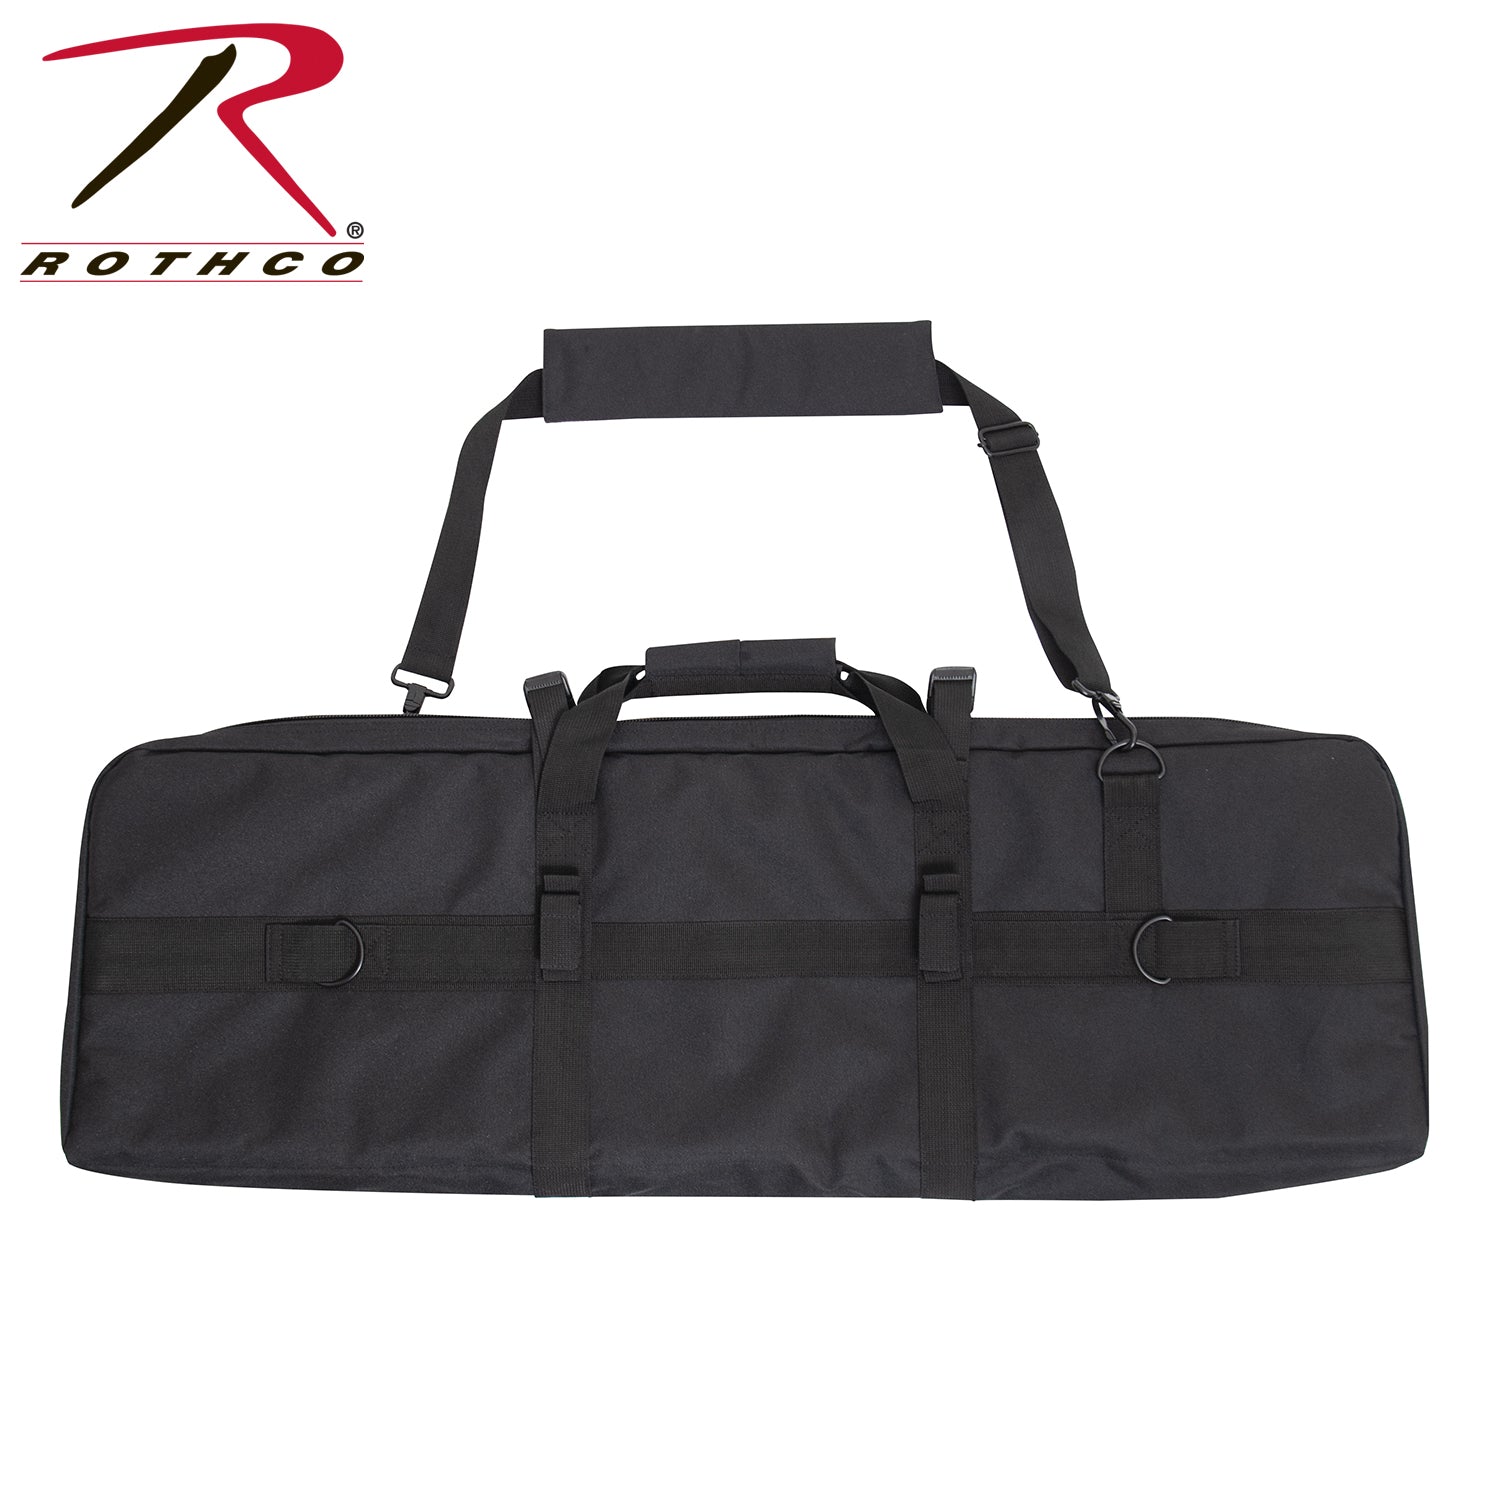 Rothco Low Profile 36" Rifle Case